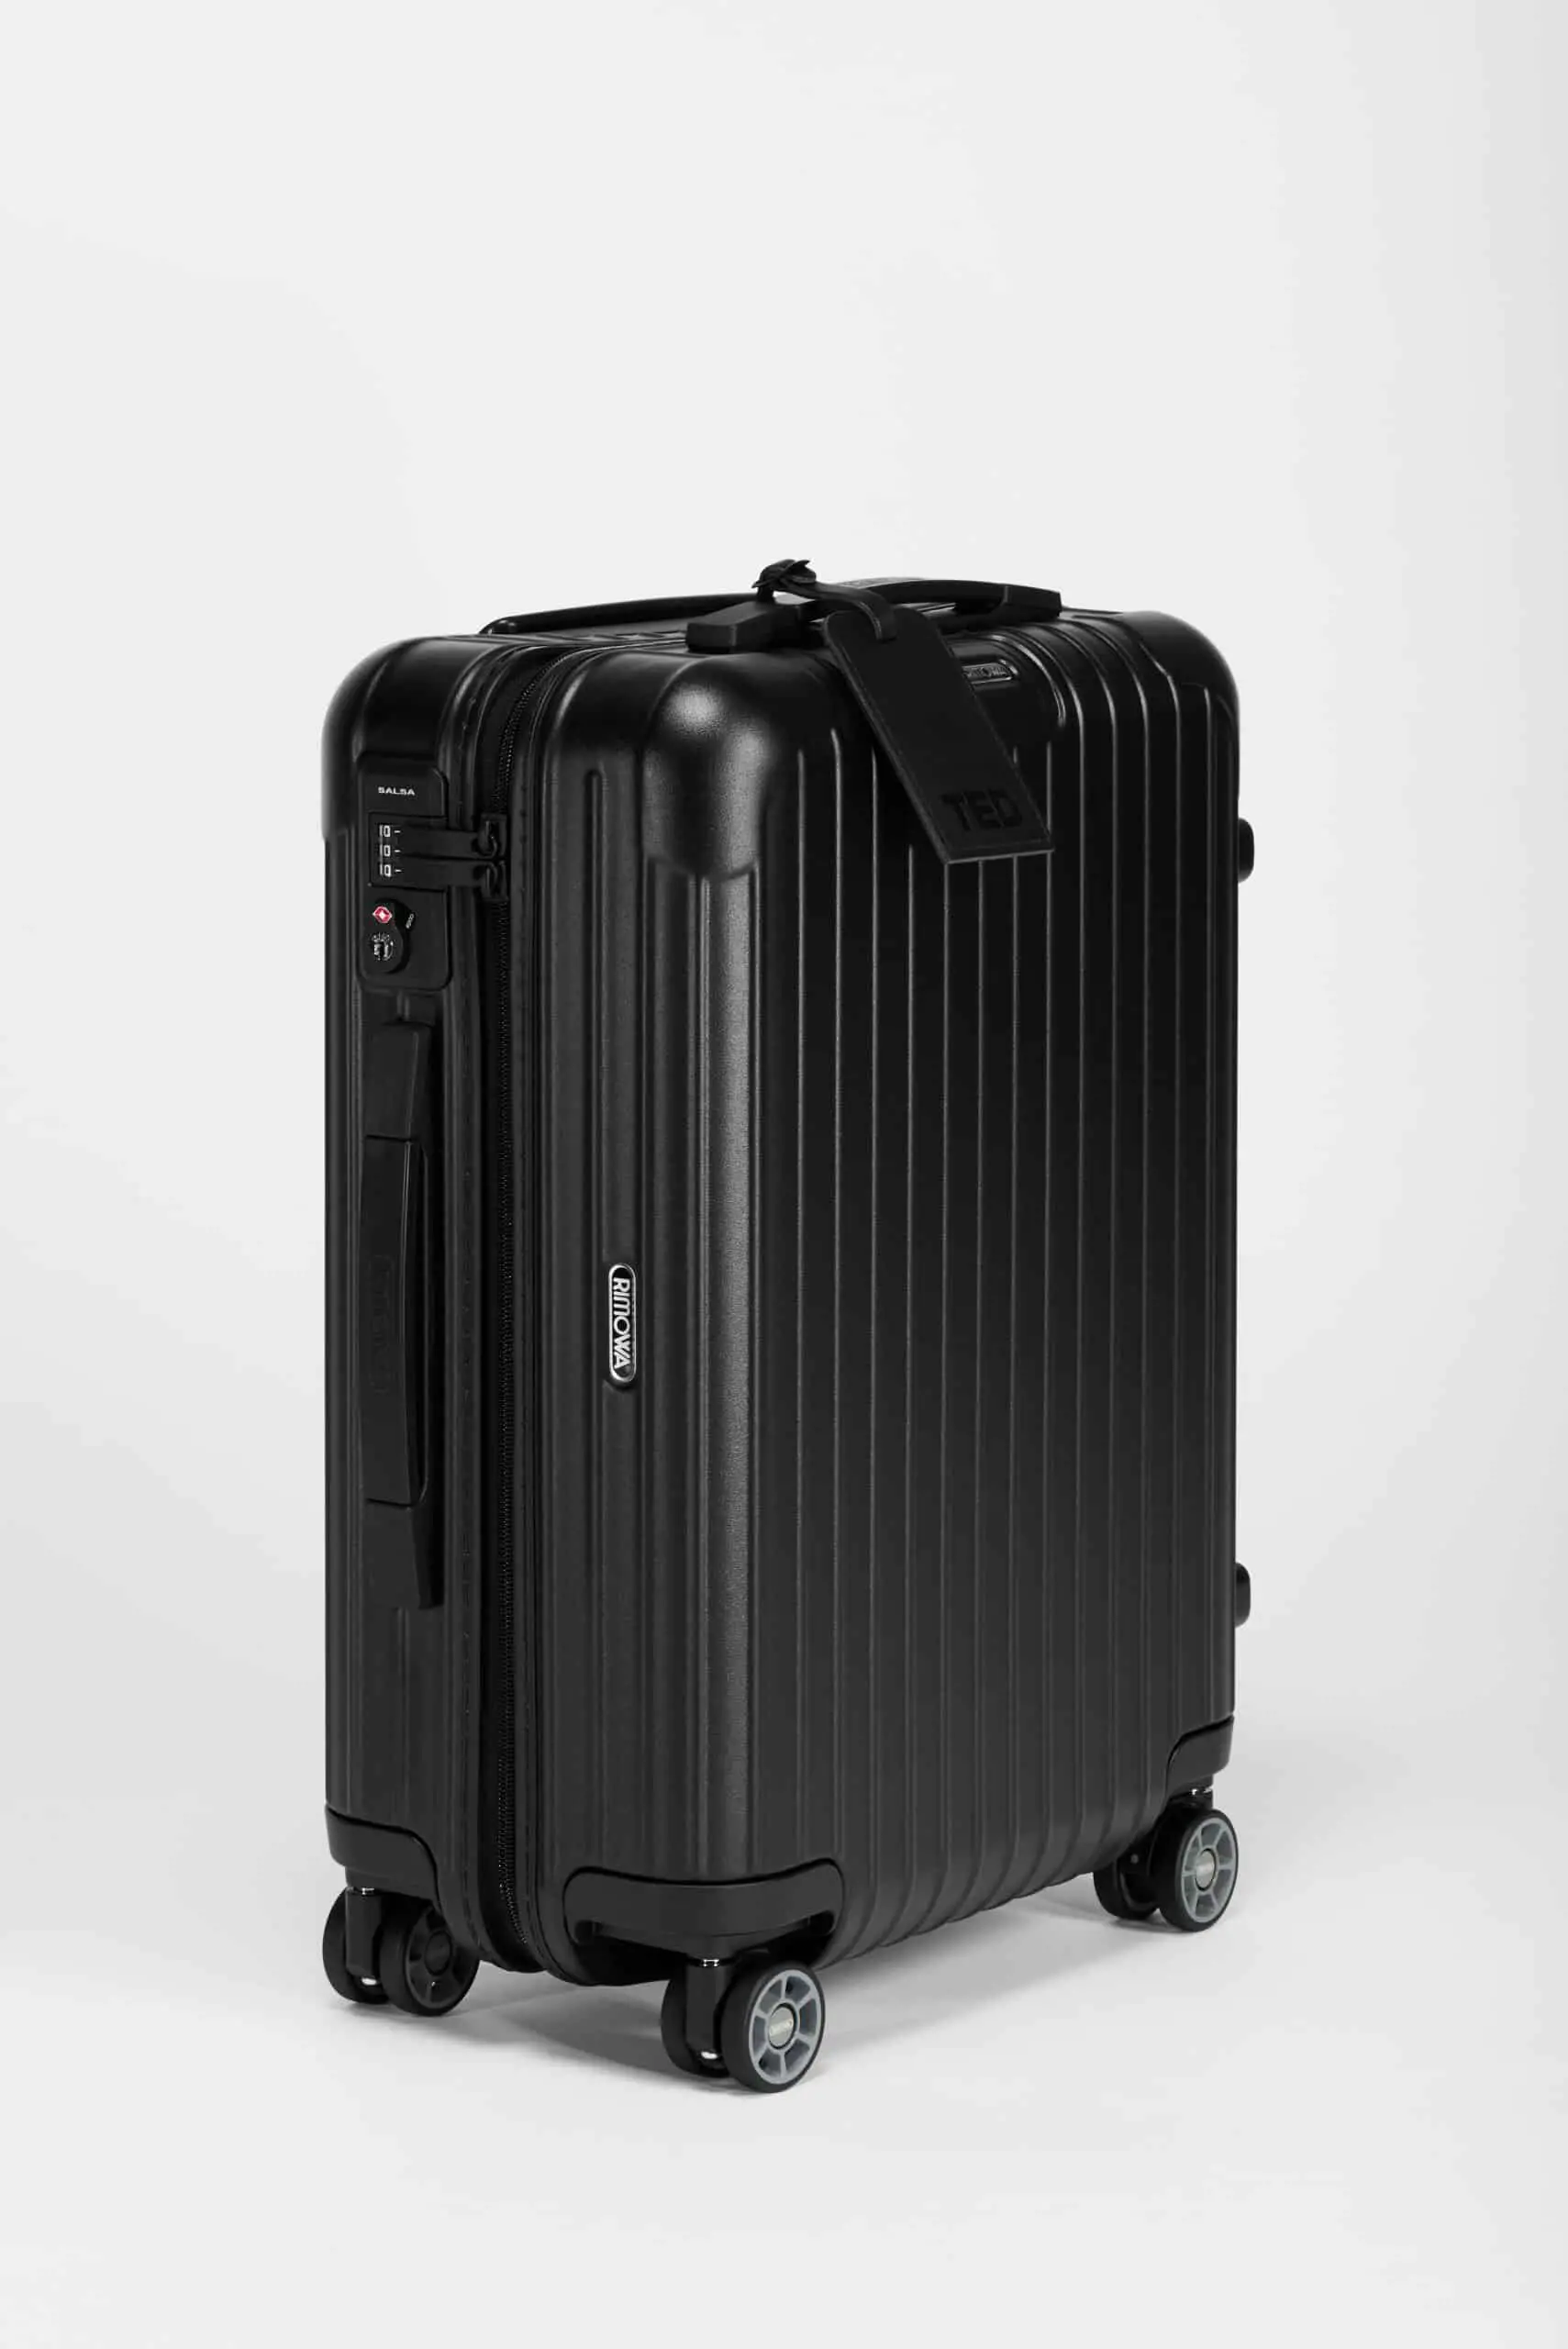 How To Identify A Fake Rimowa Suitcase